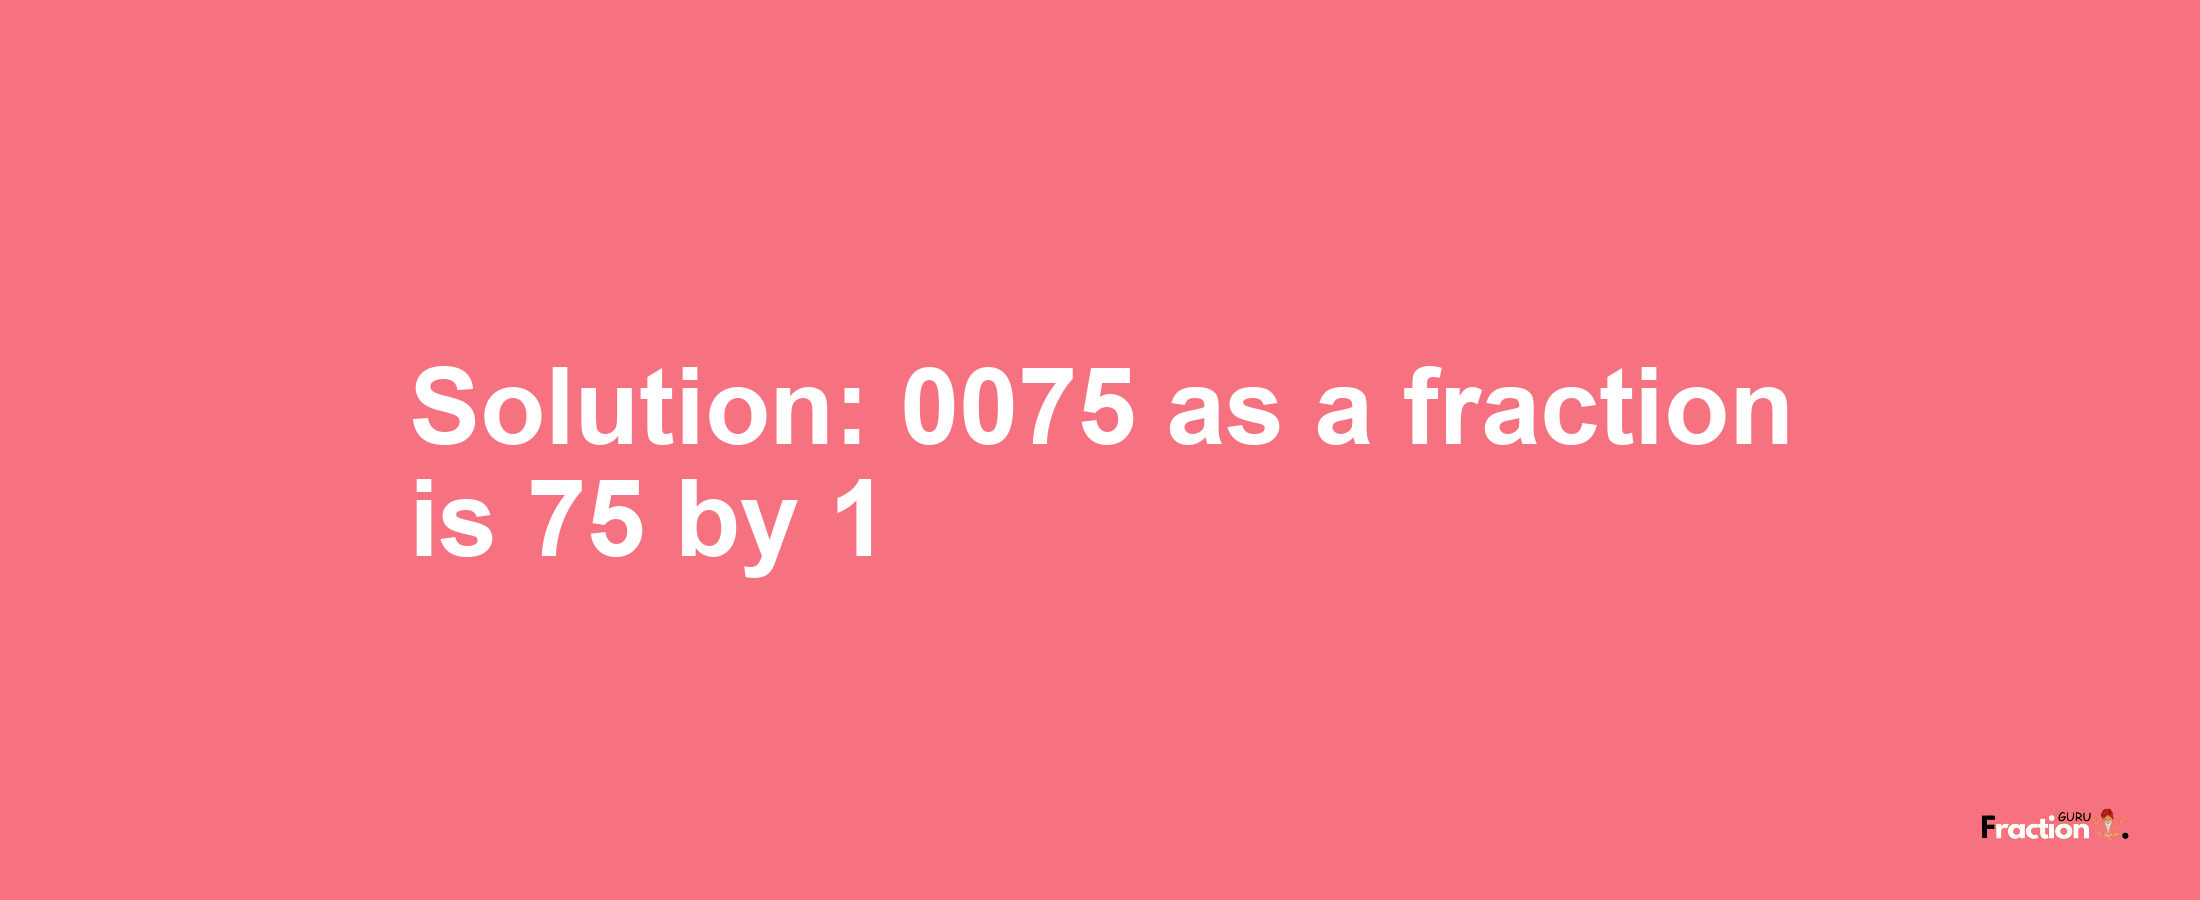 Solution:0075 as a fraction is 75/1